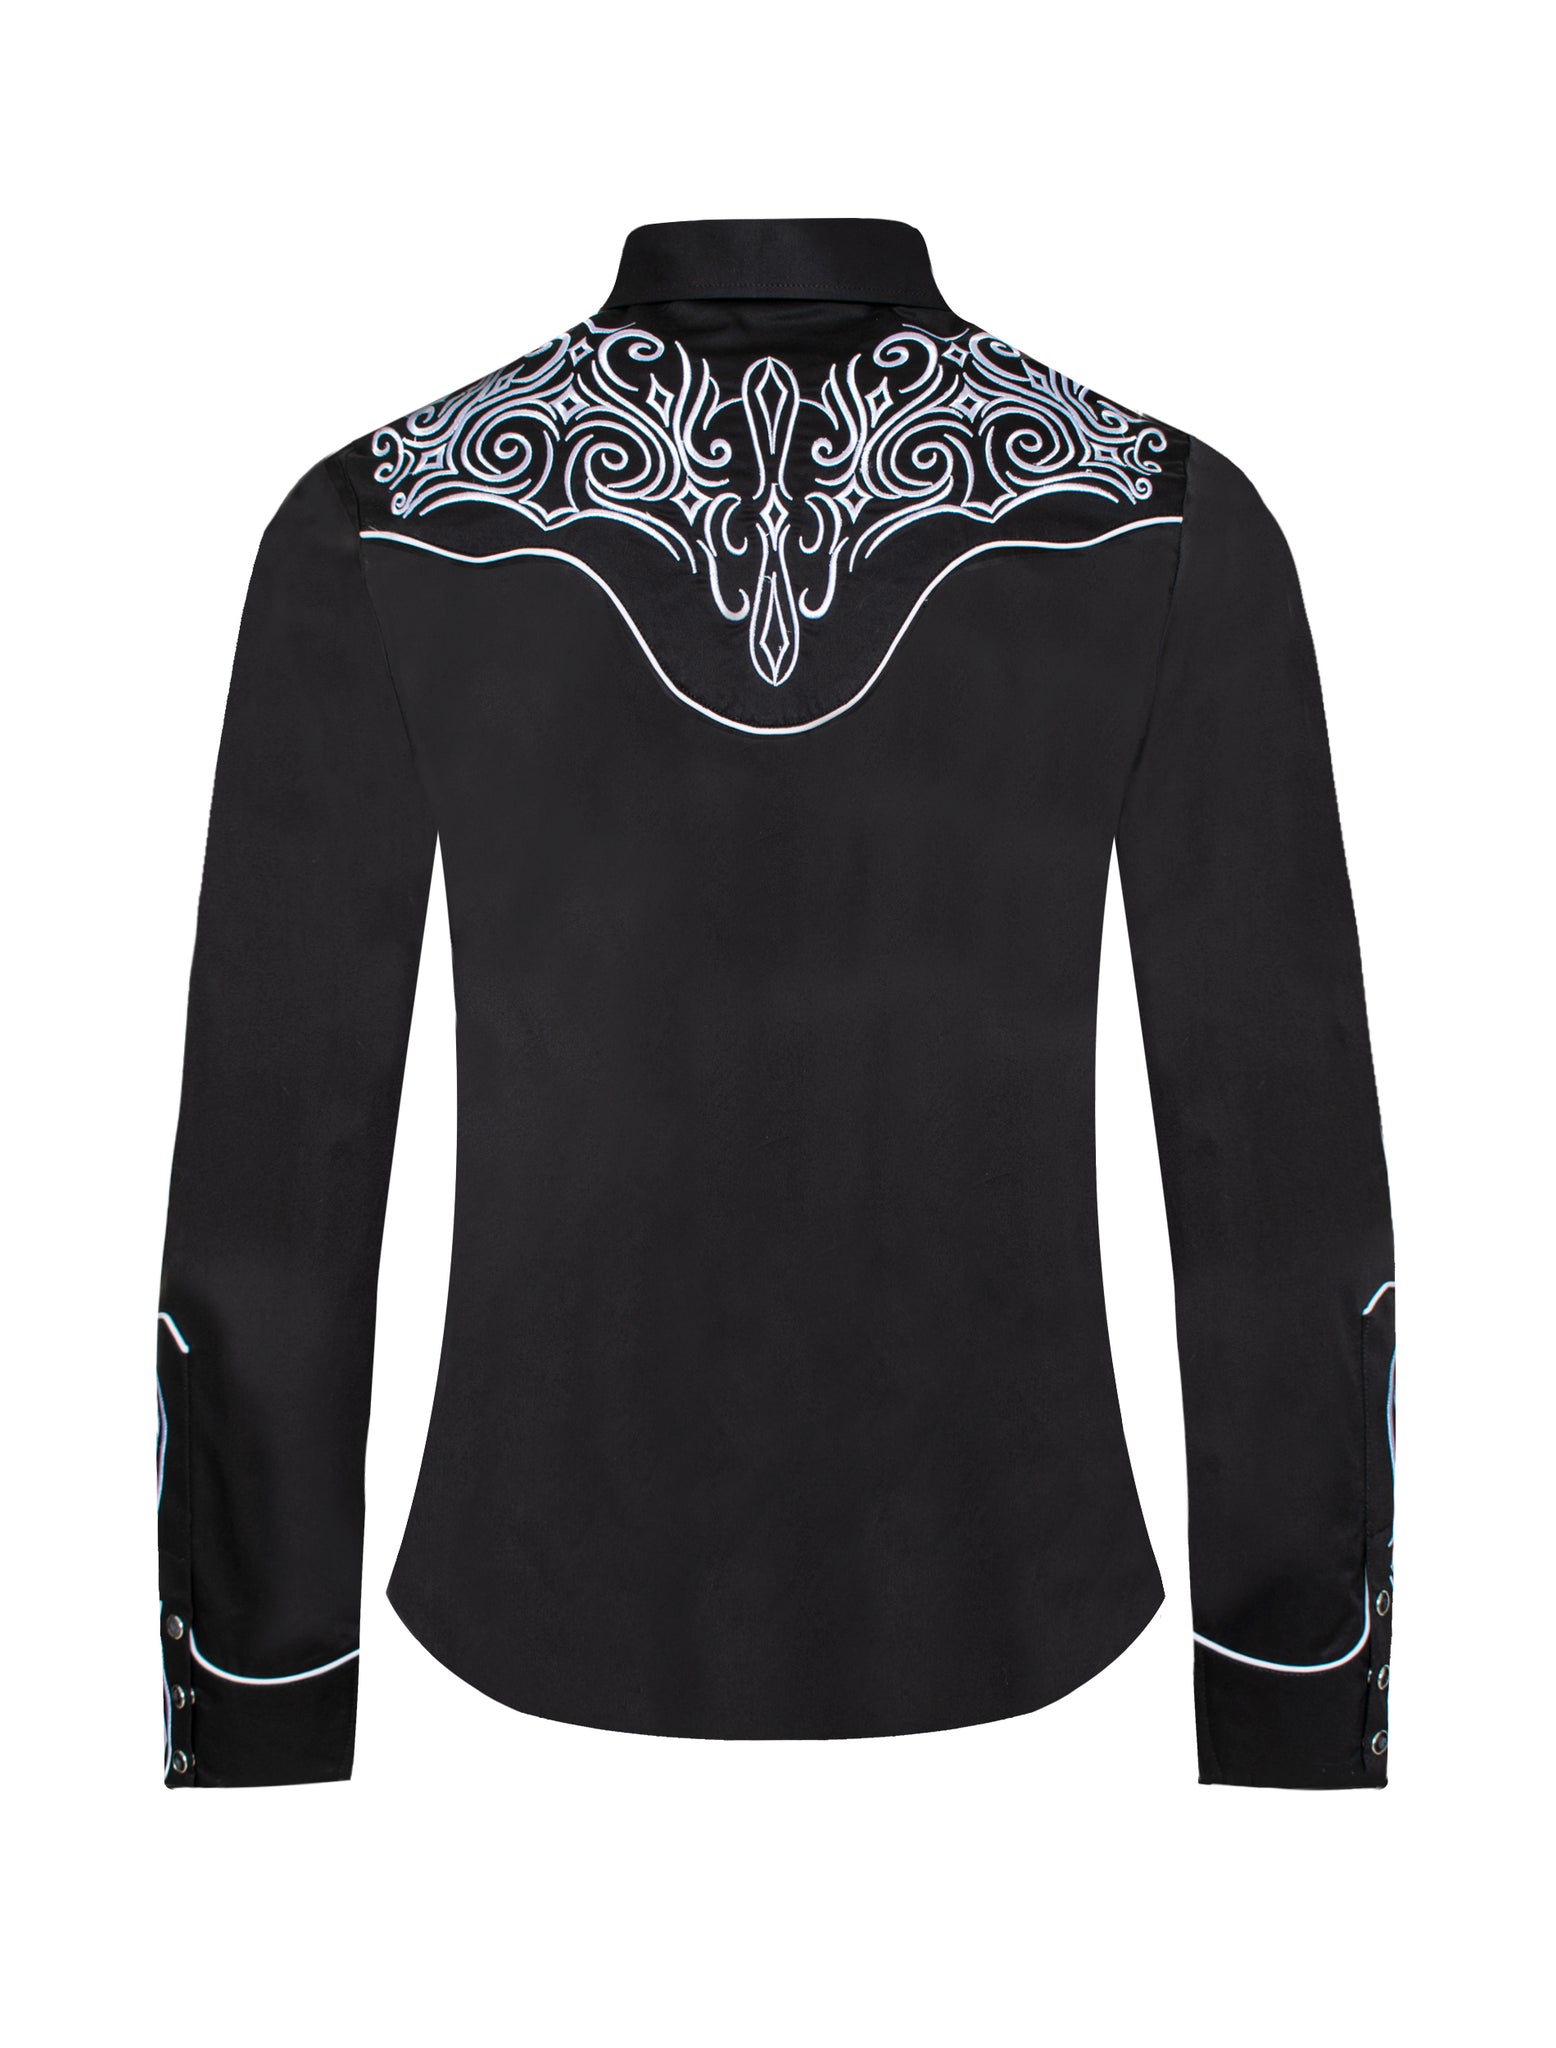 Women’s Western Embroidered Shirts-LS500-517